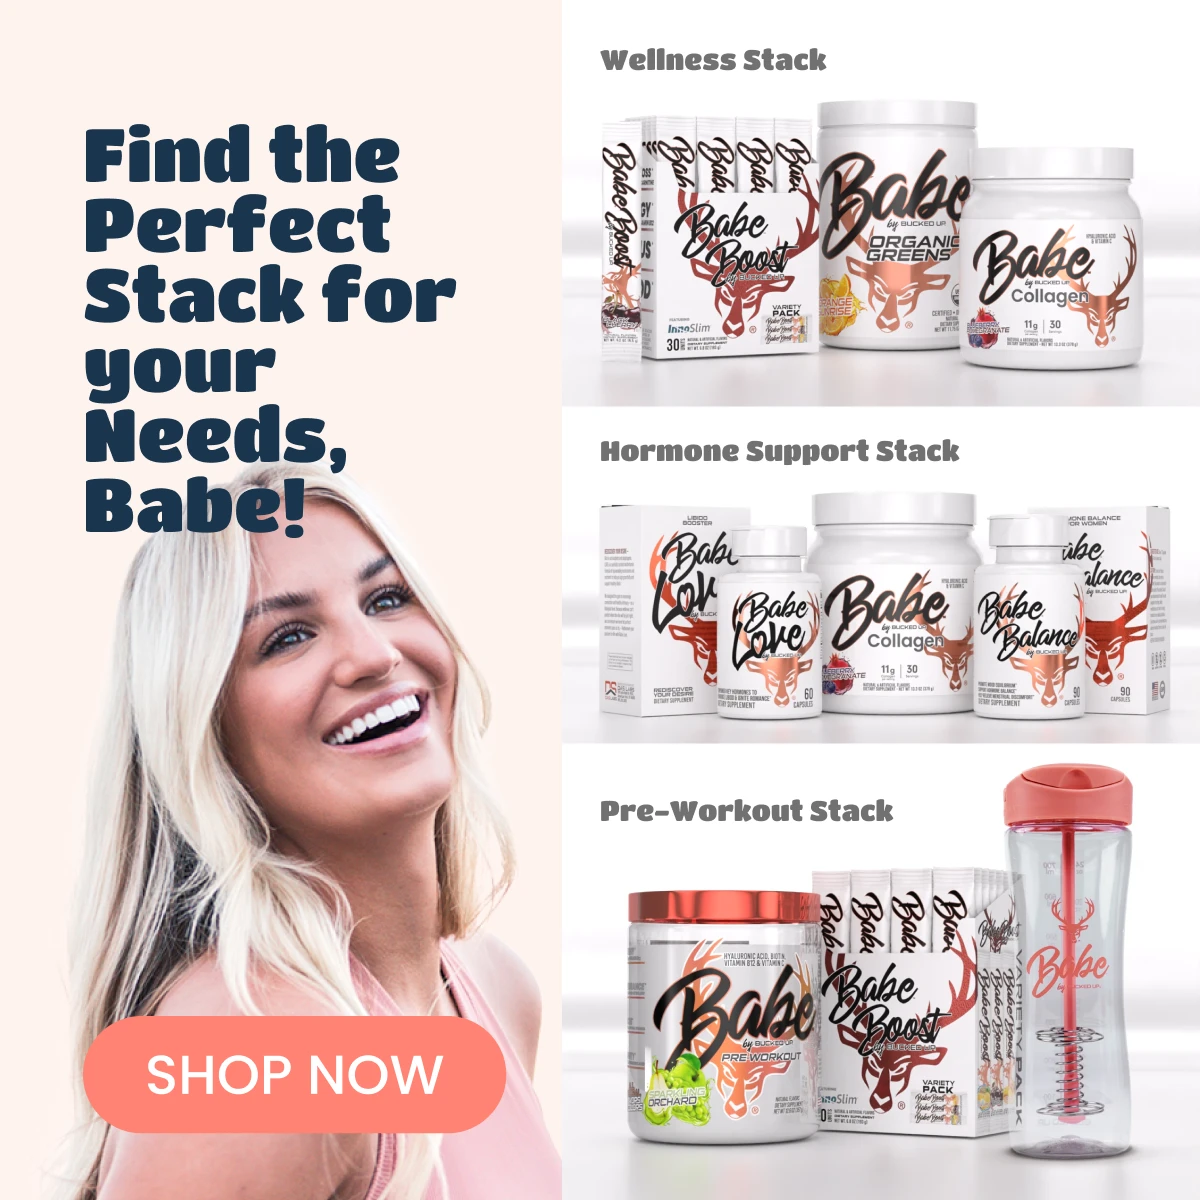 Babe Stacks - Text says "Find the Perfect Stack for your Needs, Babe!", with the button saying "SHOP NOW". 3 product bundles are shown and labeled: the "wellness stack" which features images of babe boost, babe organic greens